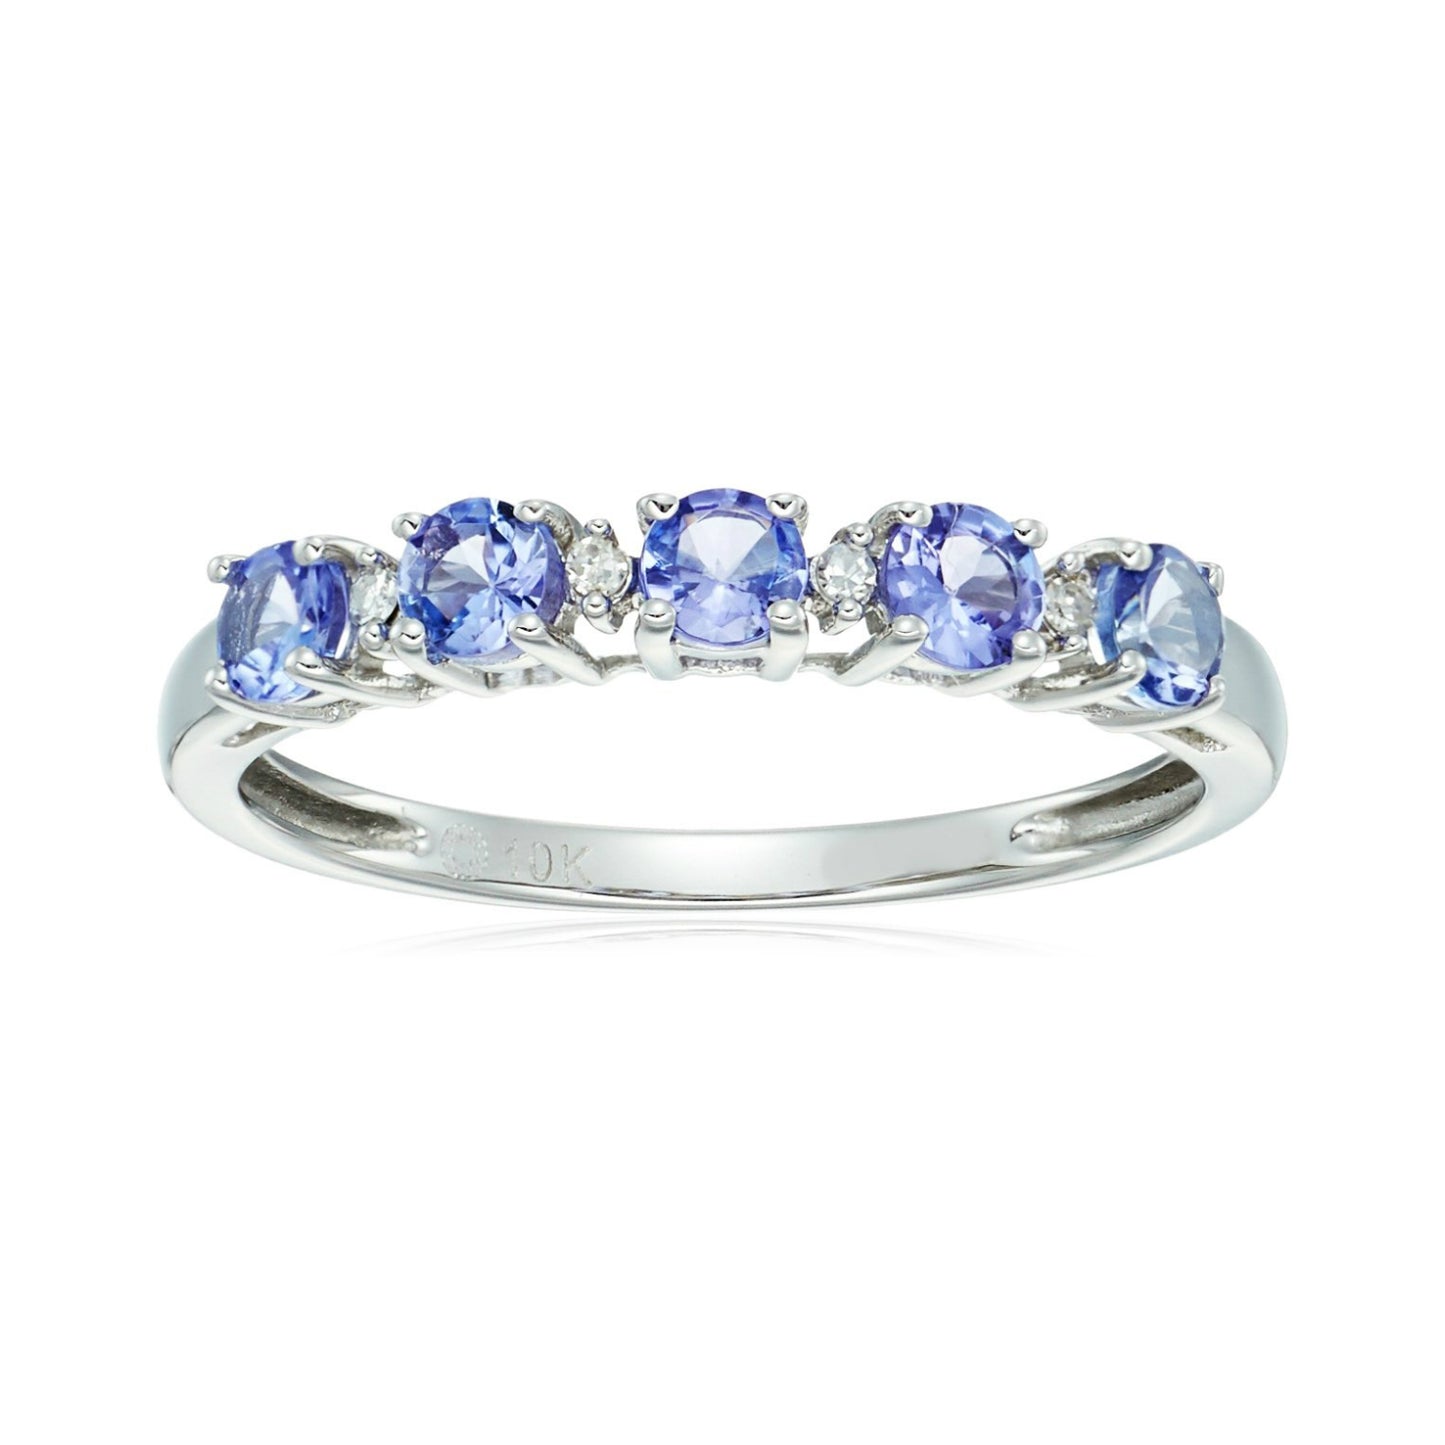 10k White Gold Tanzanite and Diamond Accented Stackable Ring - pinctore